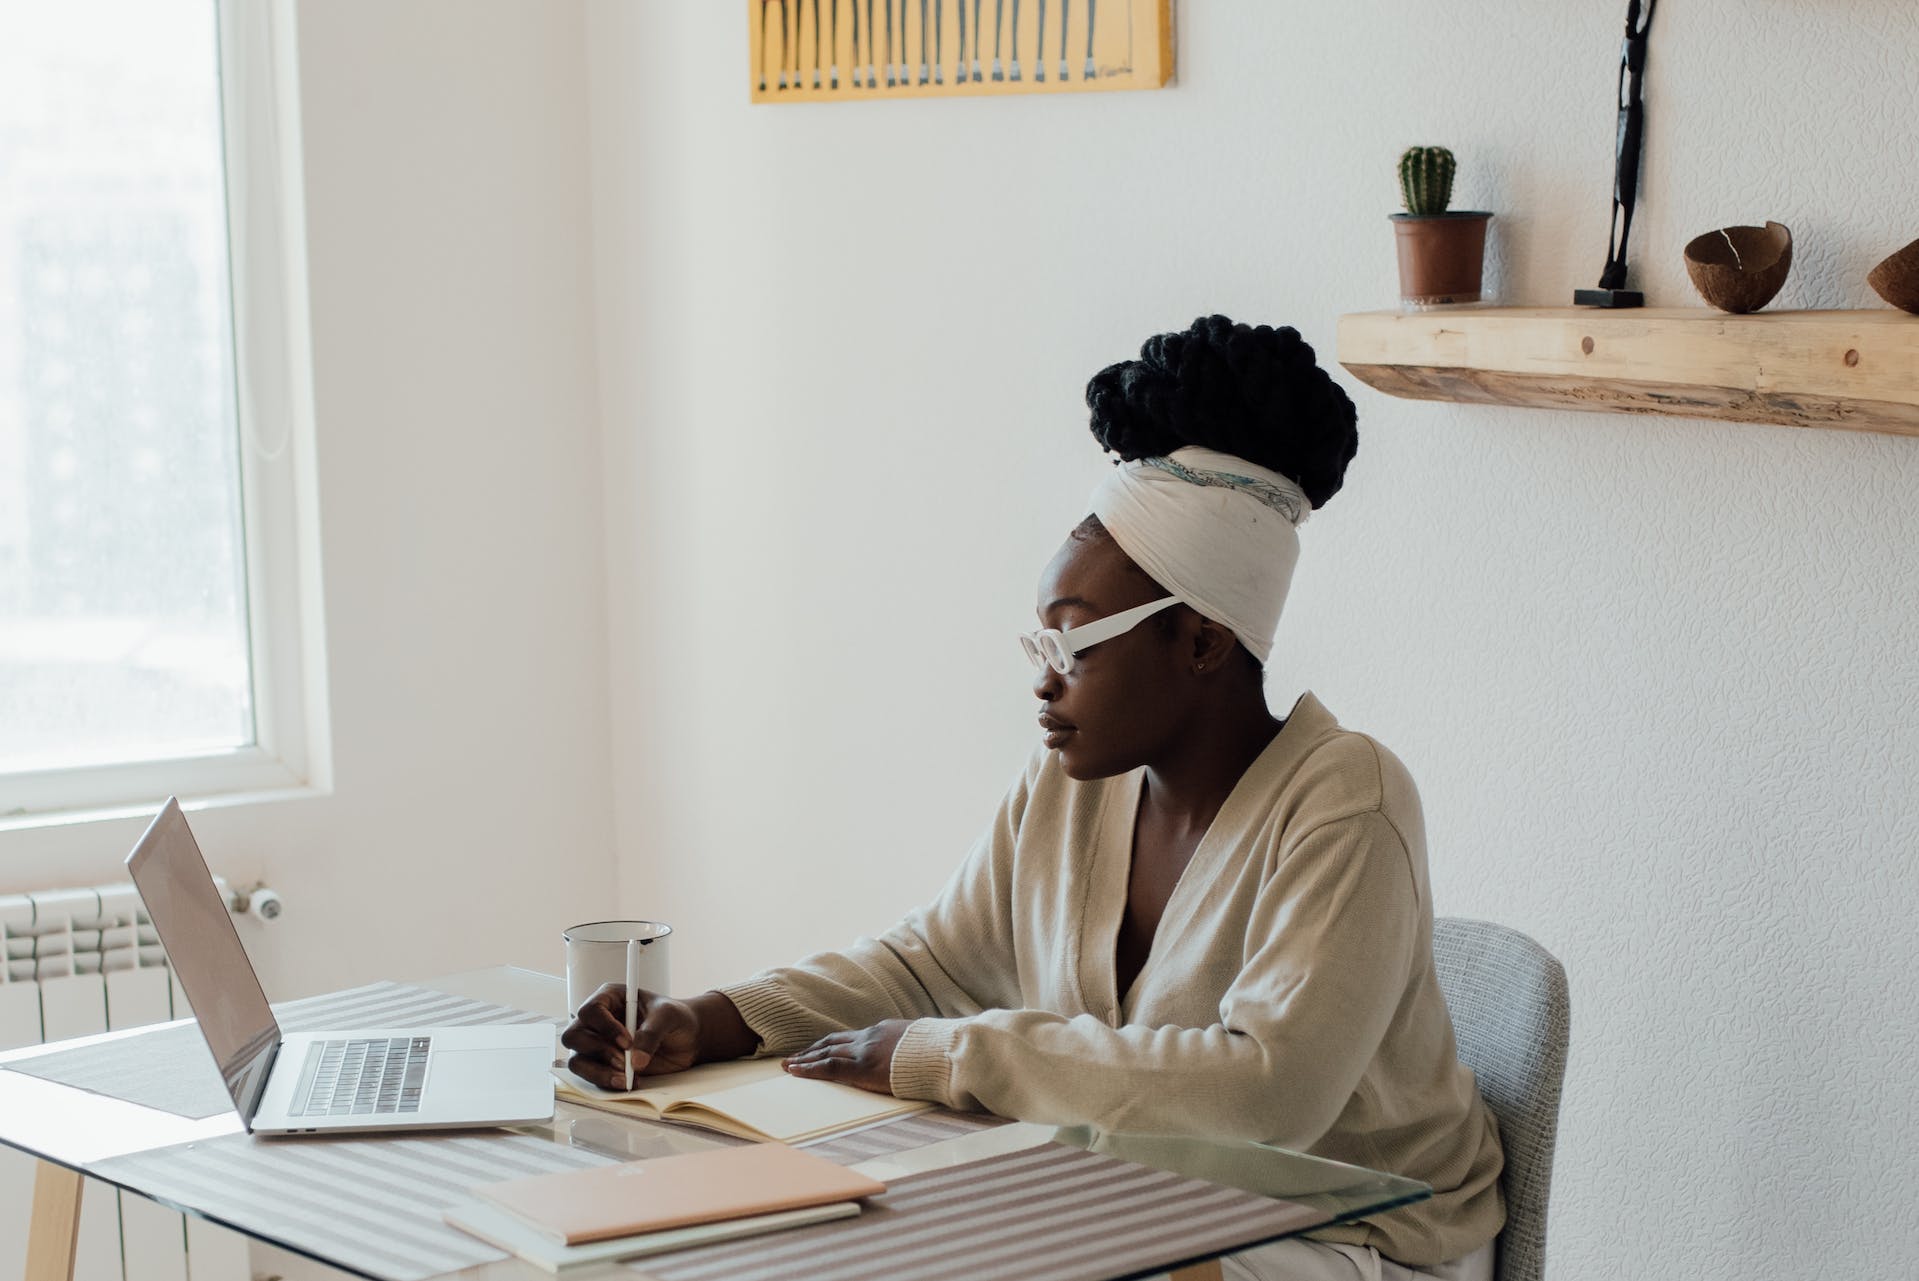 A focused woman wearing a headband sits at a minimalist desk with a laptop, notepad, and a cup, embracing authenticity as she works diligently in a bright, cozy workspace.